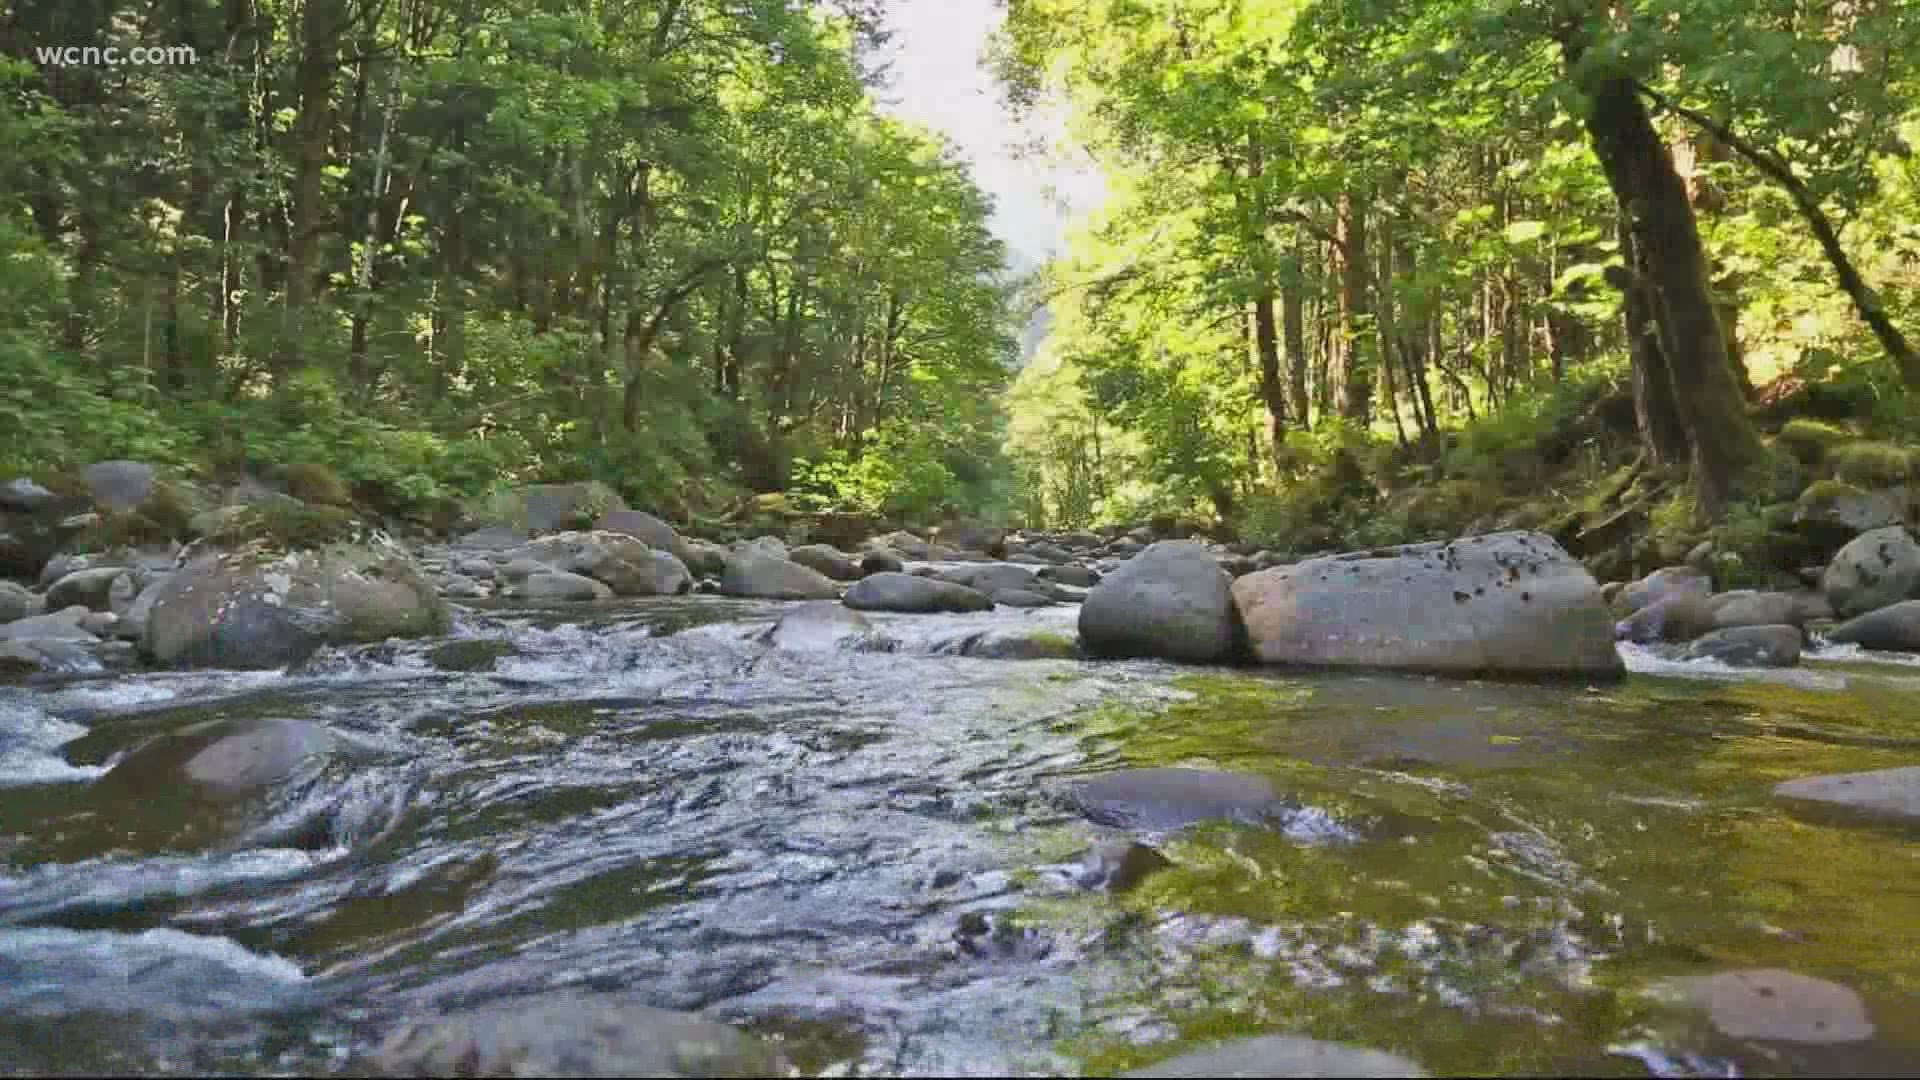 Get to know your local creeks this spring.